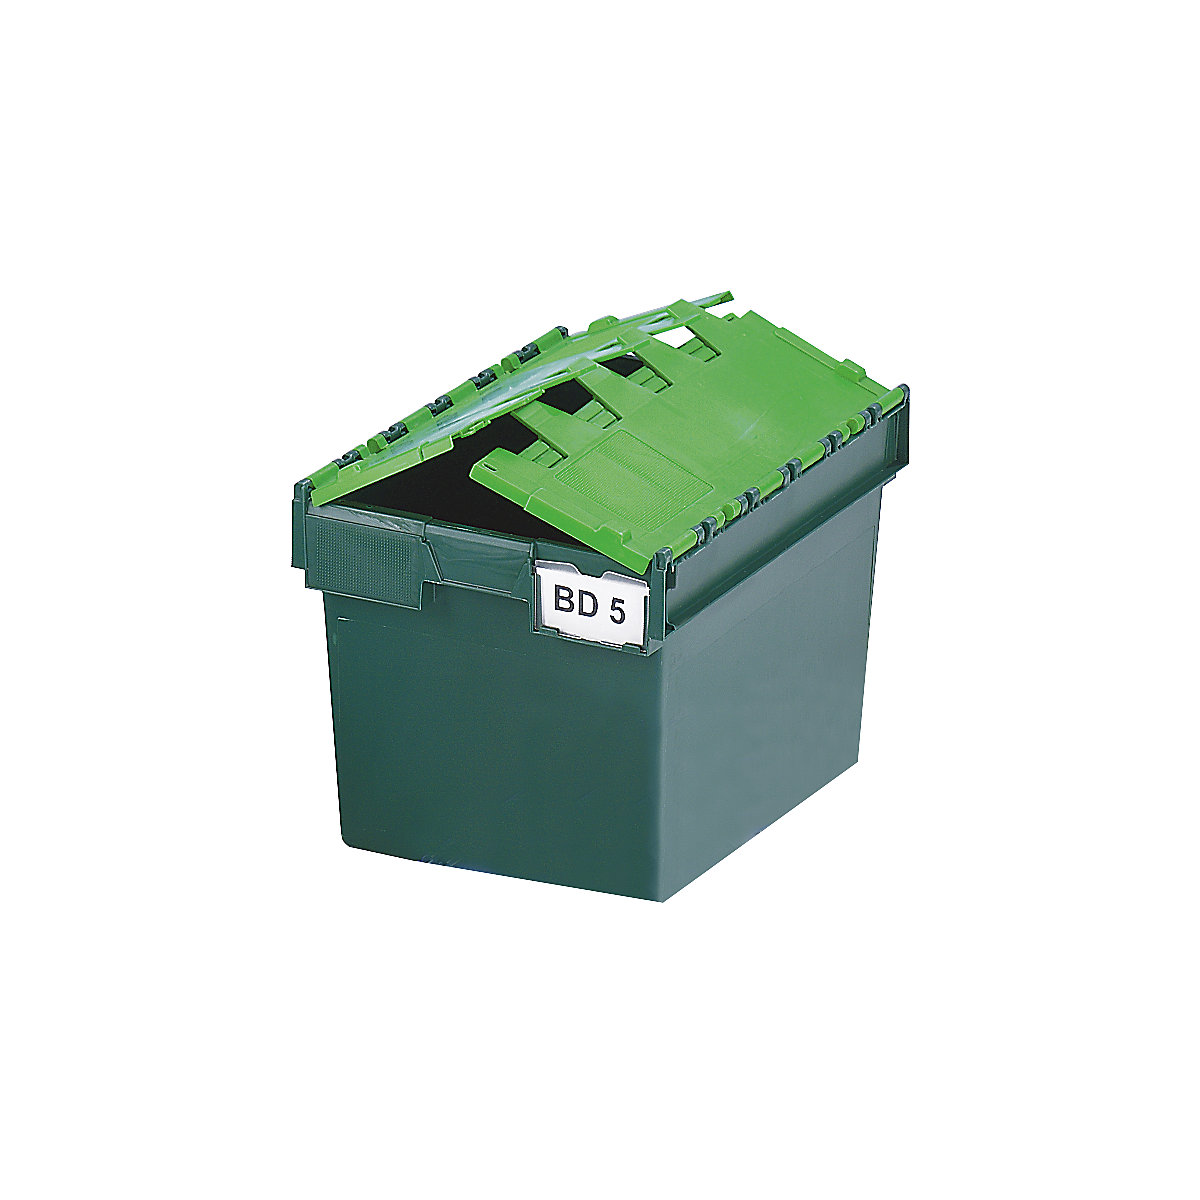 KAIMAN reusable stacking container, capacity 64 litres, LxWxH 600 x 400 x 365 mm, green